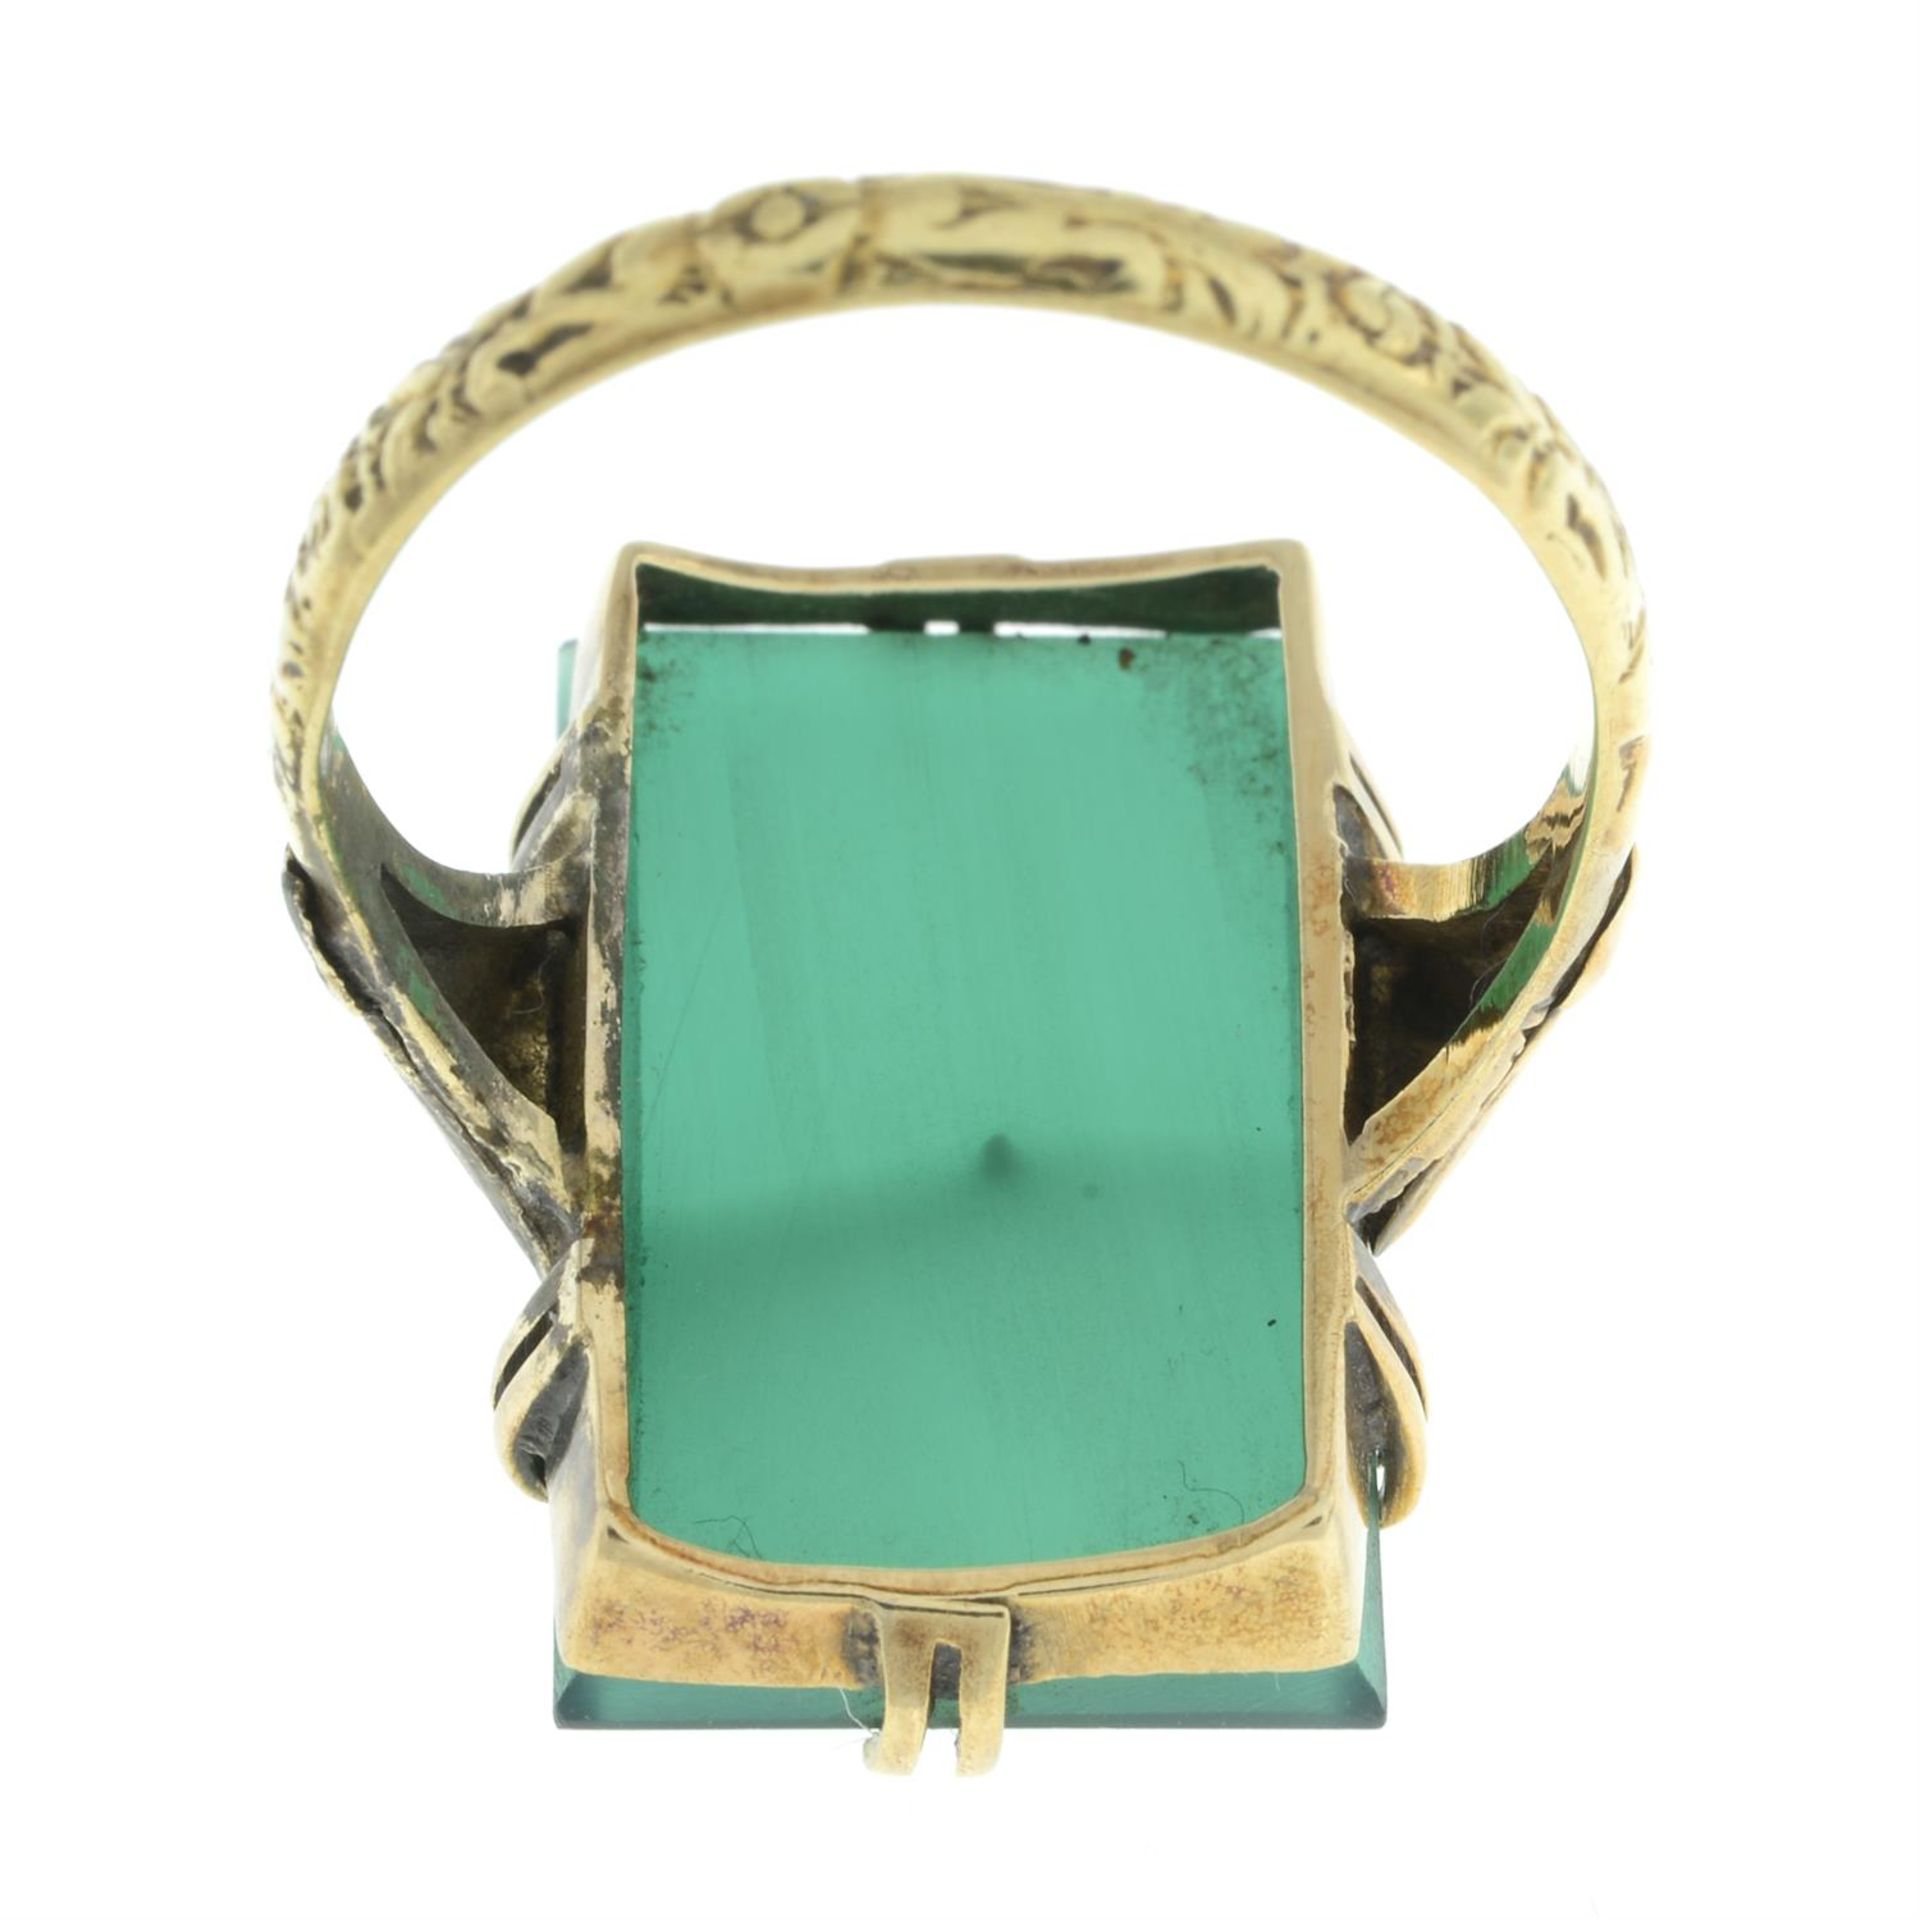 Late 19th century chrysoprase signet ring. - Image 2 of 2